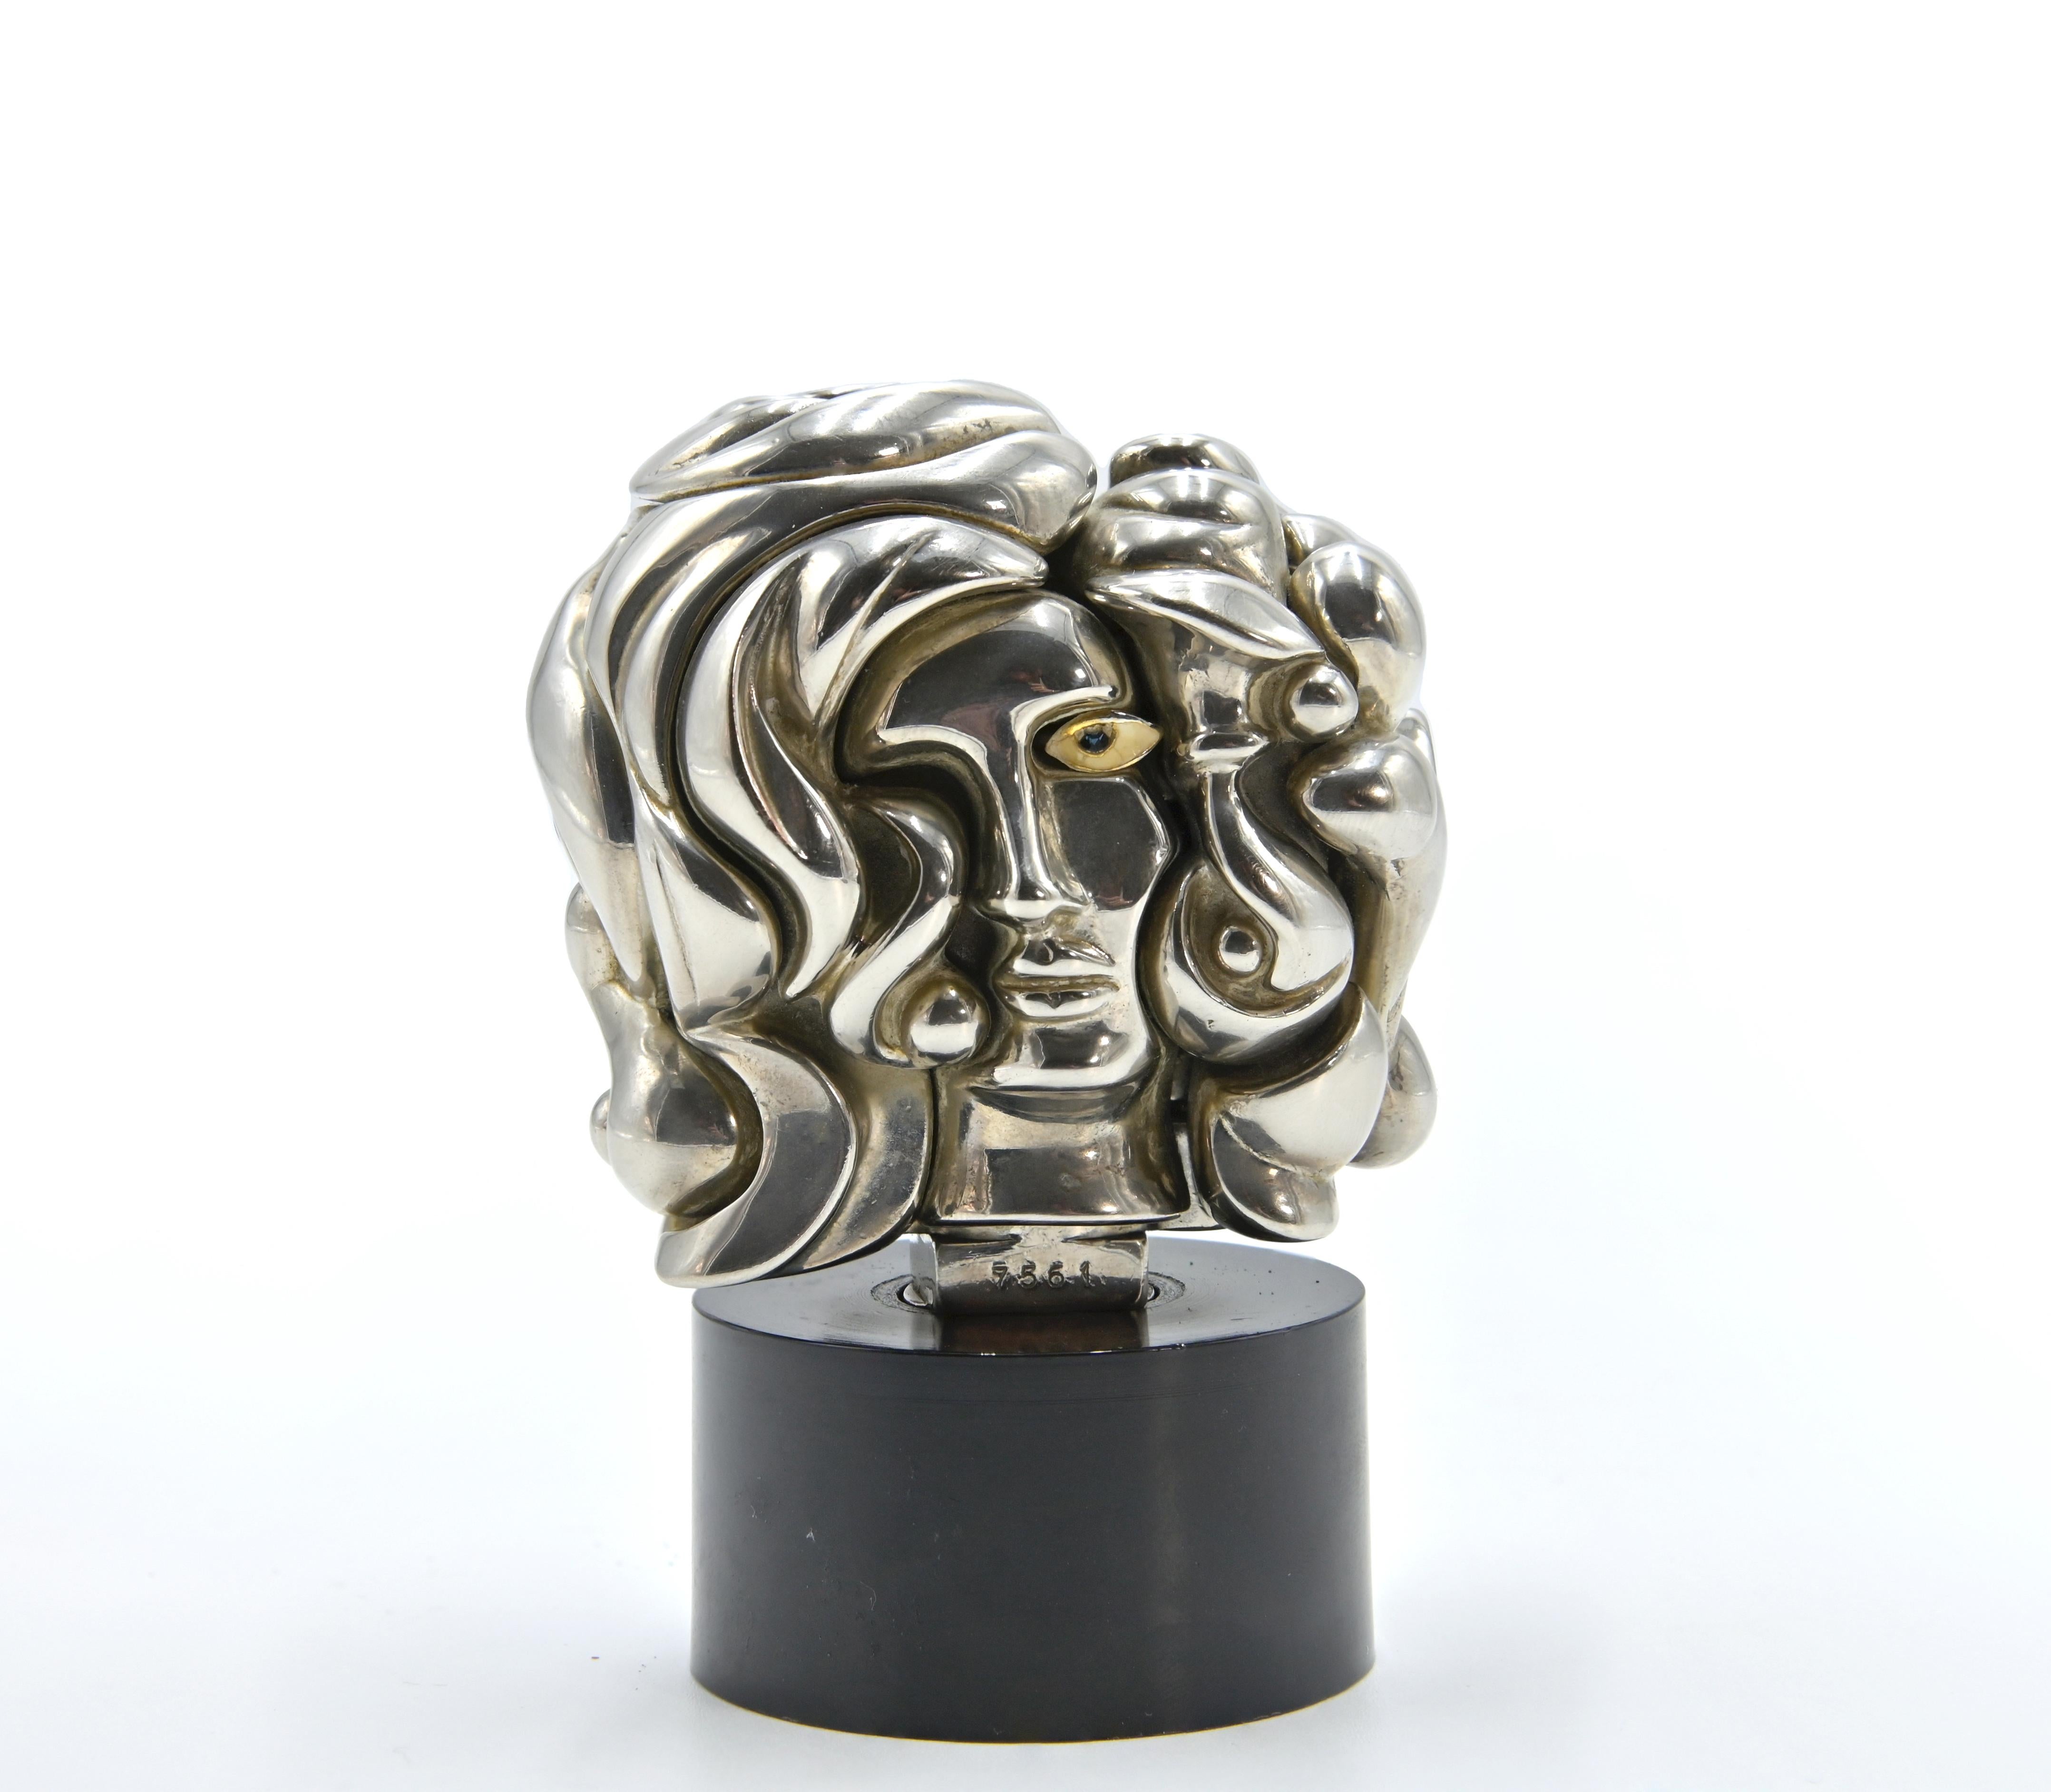 Miguel Berrocal Figurative Sculpture - Portrait of Michele - Nickel Plated Sculpture by M. Berrocal - 1969